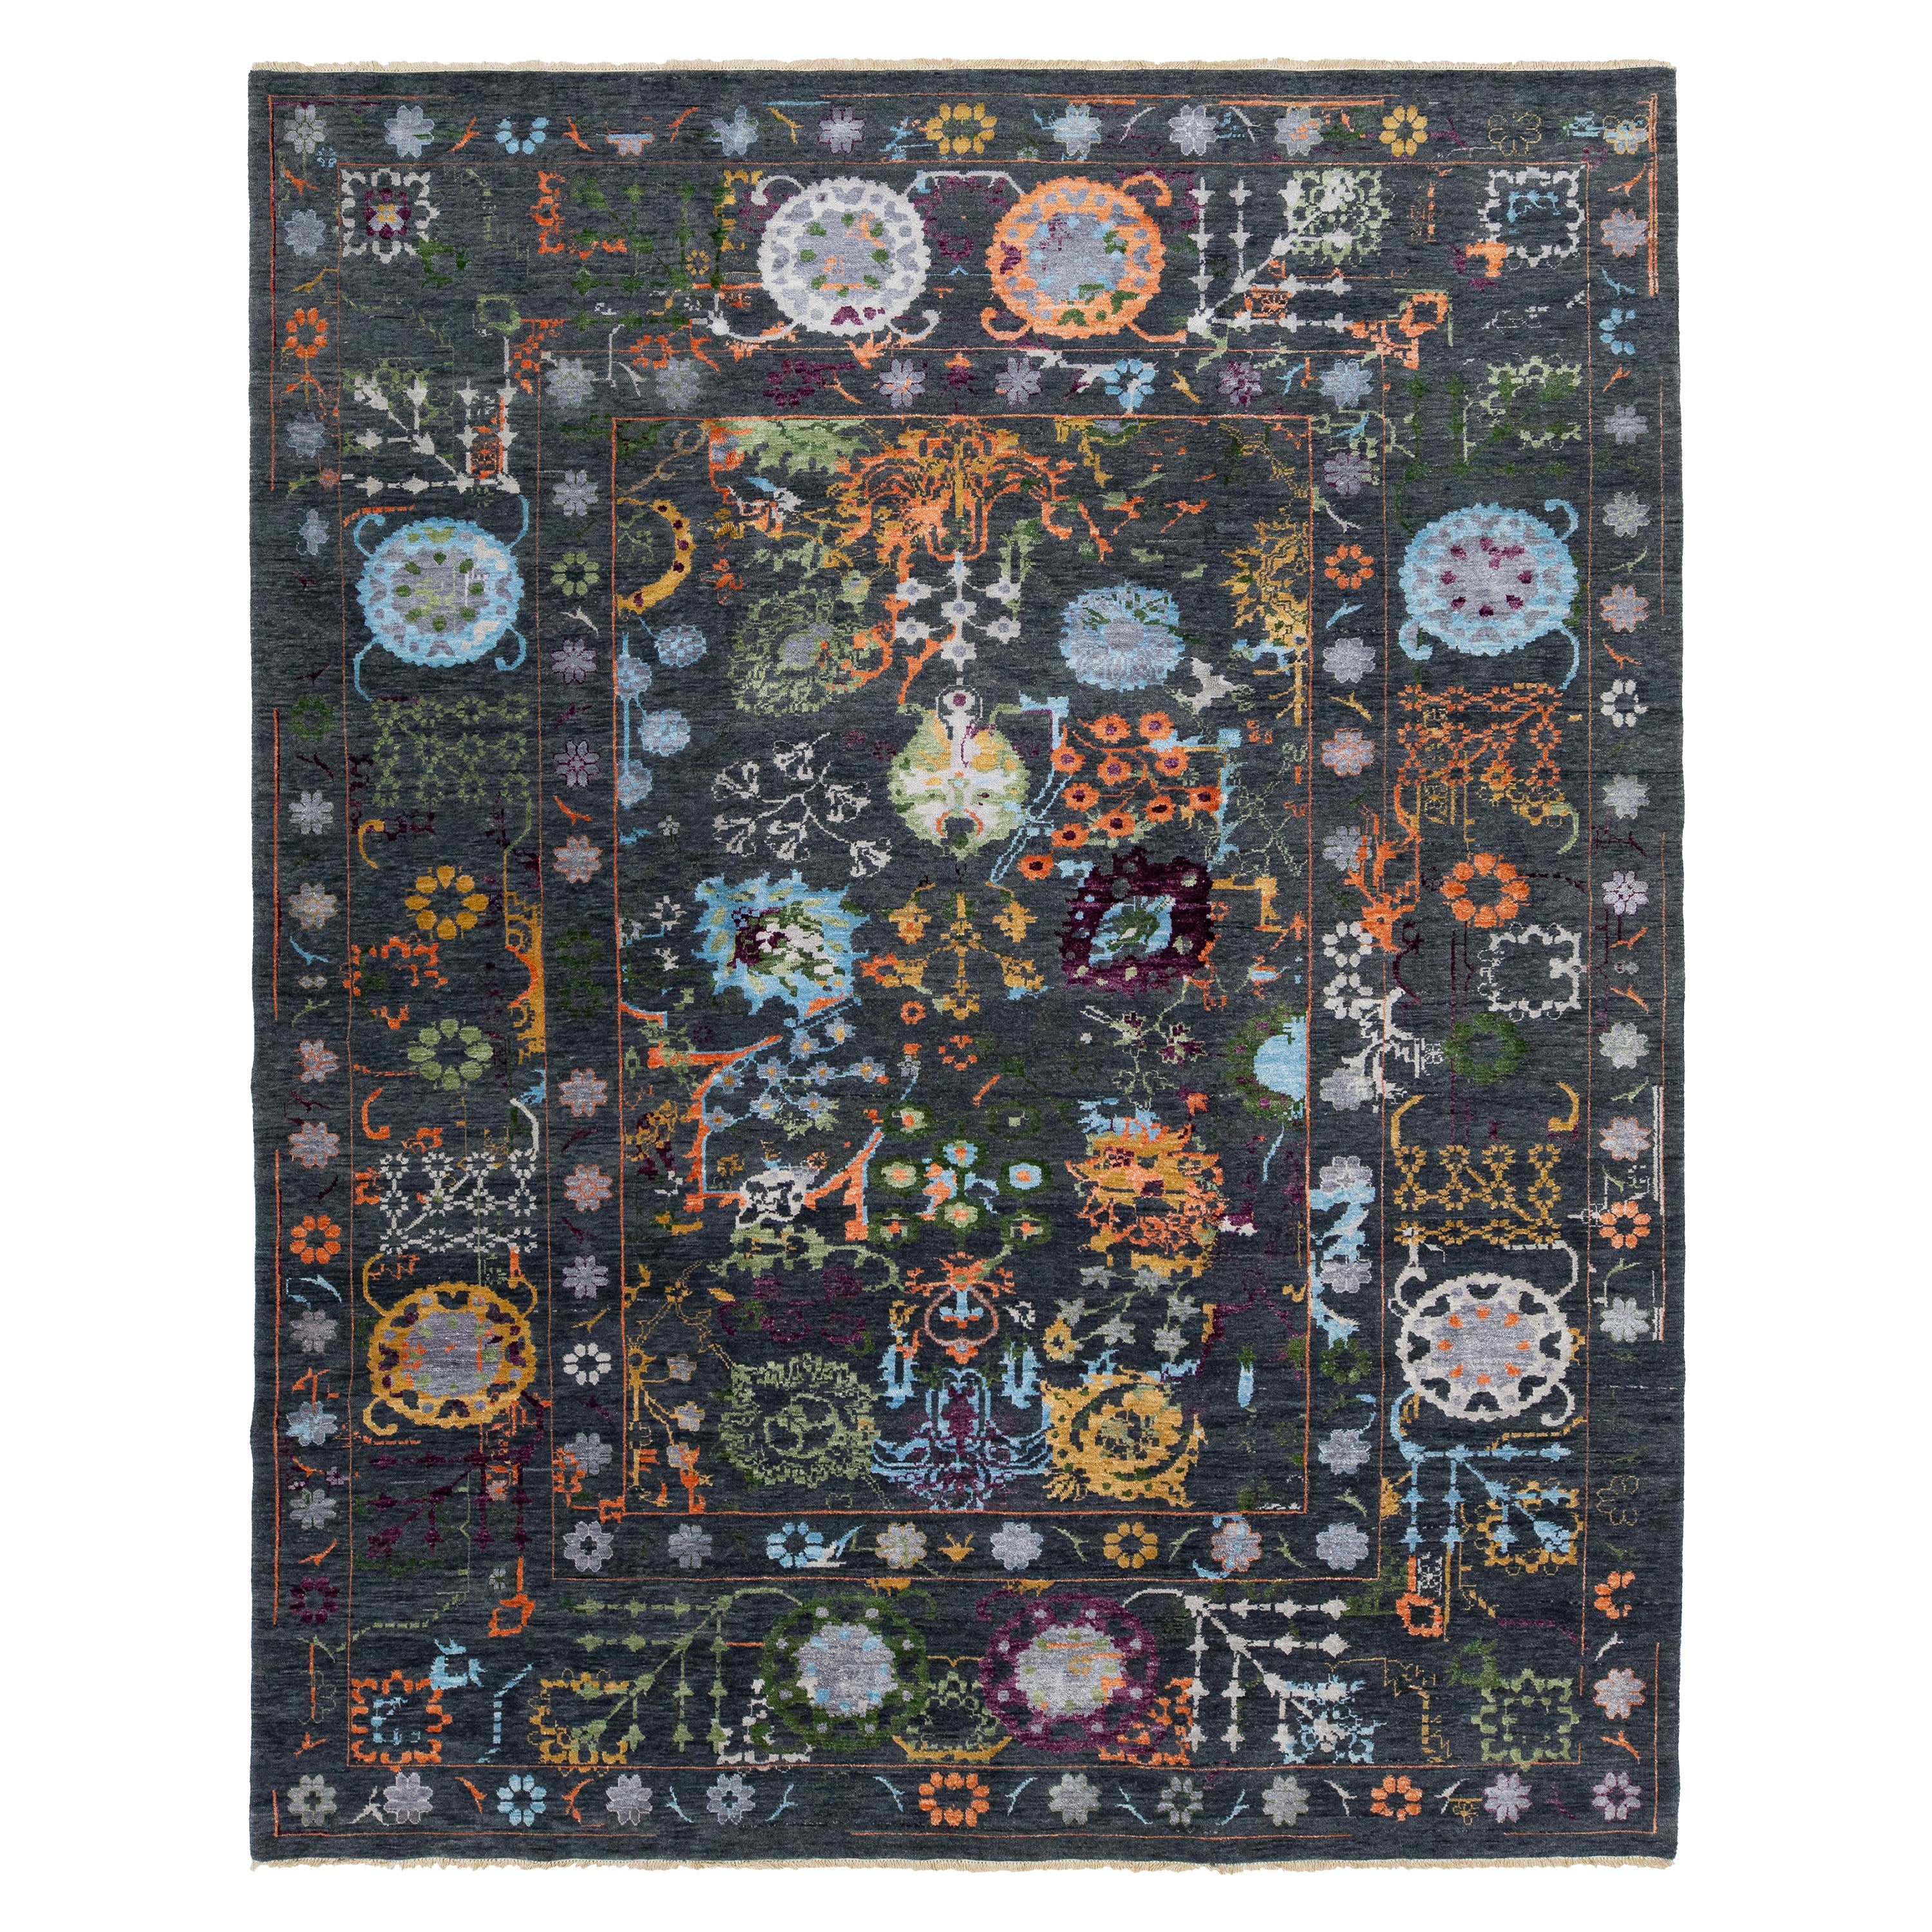  Contemporary Transitional Handmade Wool Rug with Floral Motif In Charcoal  